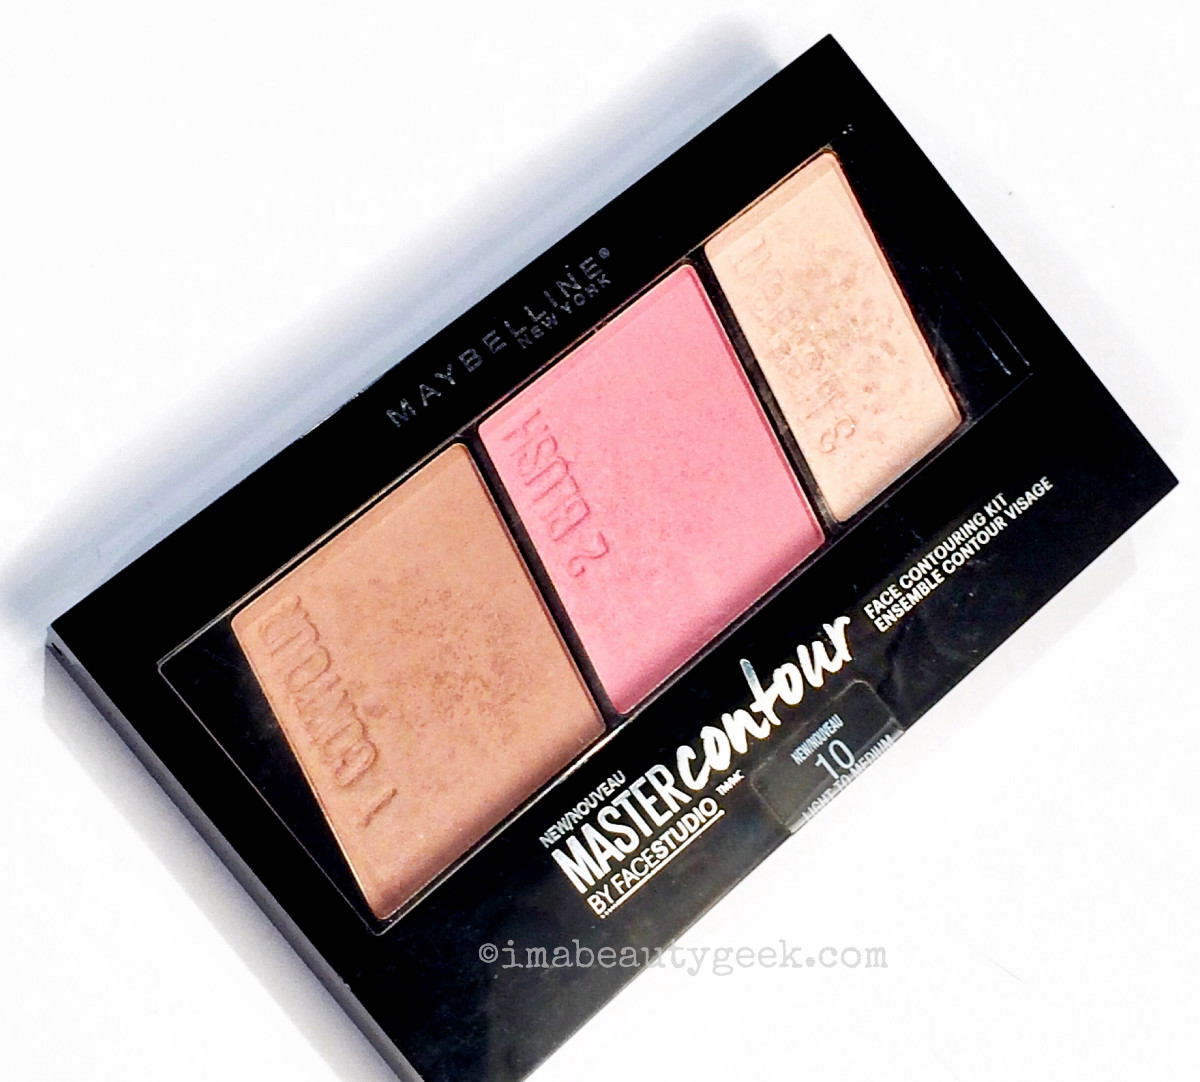 Maybelline Master Contour kit (January), swiped from Grace Lee's WMCFW station to shoot.